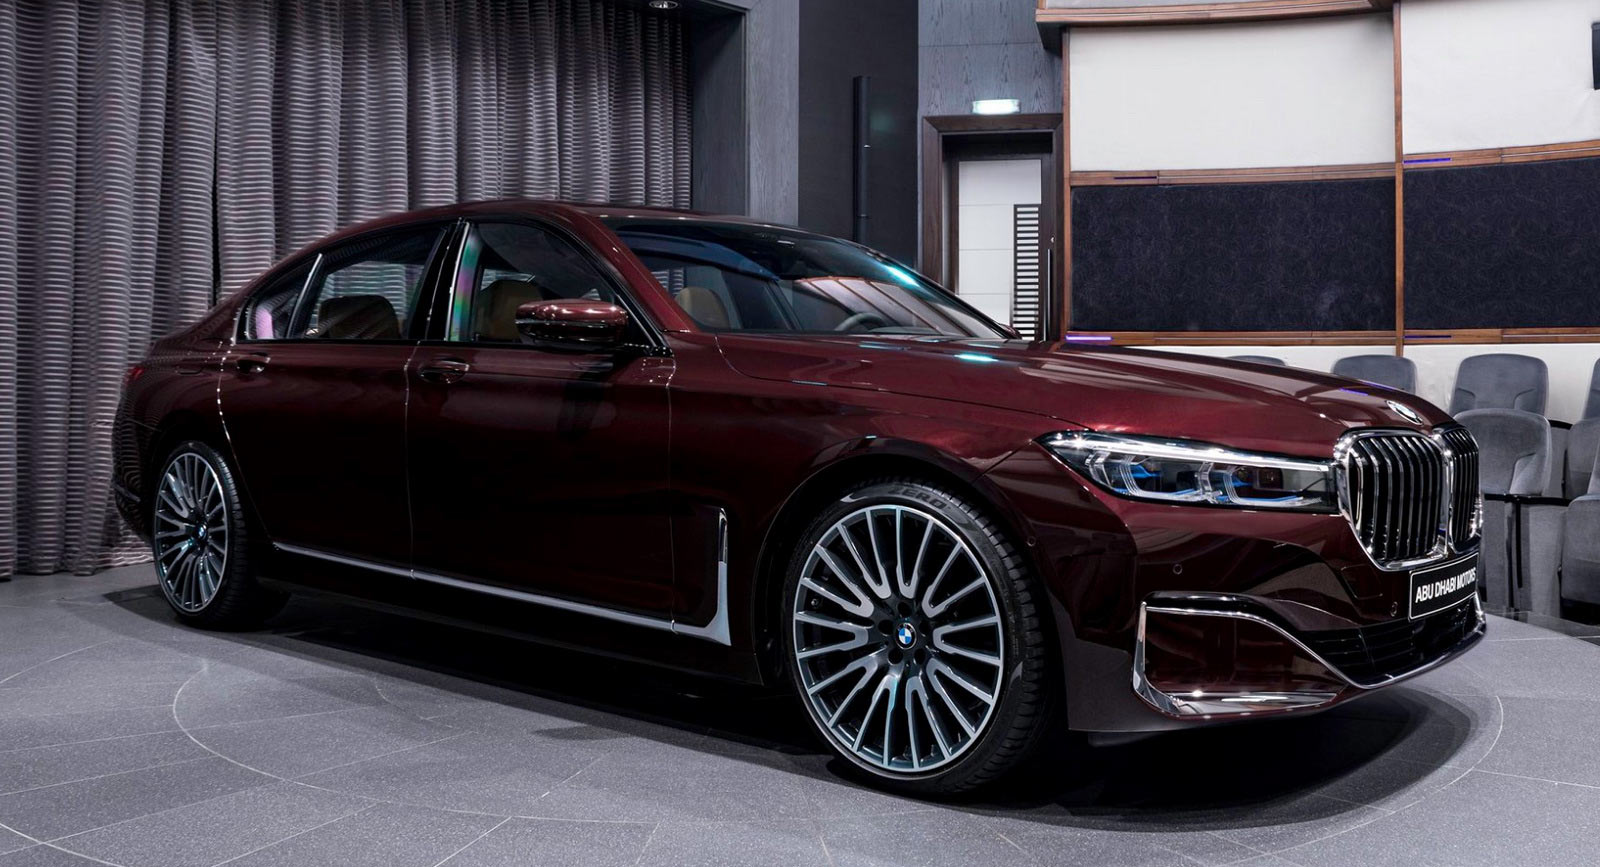 2020 BMW 750Li Tries To Look Dashing In Royal Burgundy Red | Carscoops